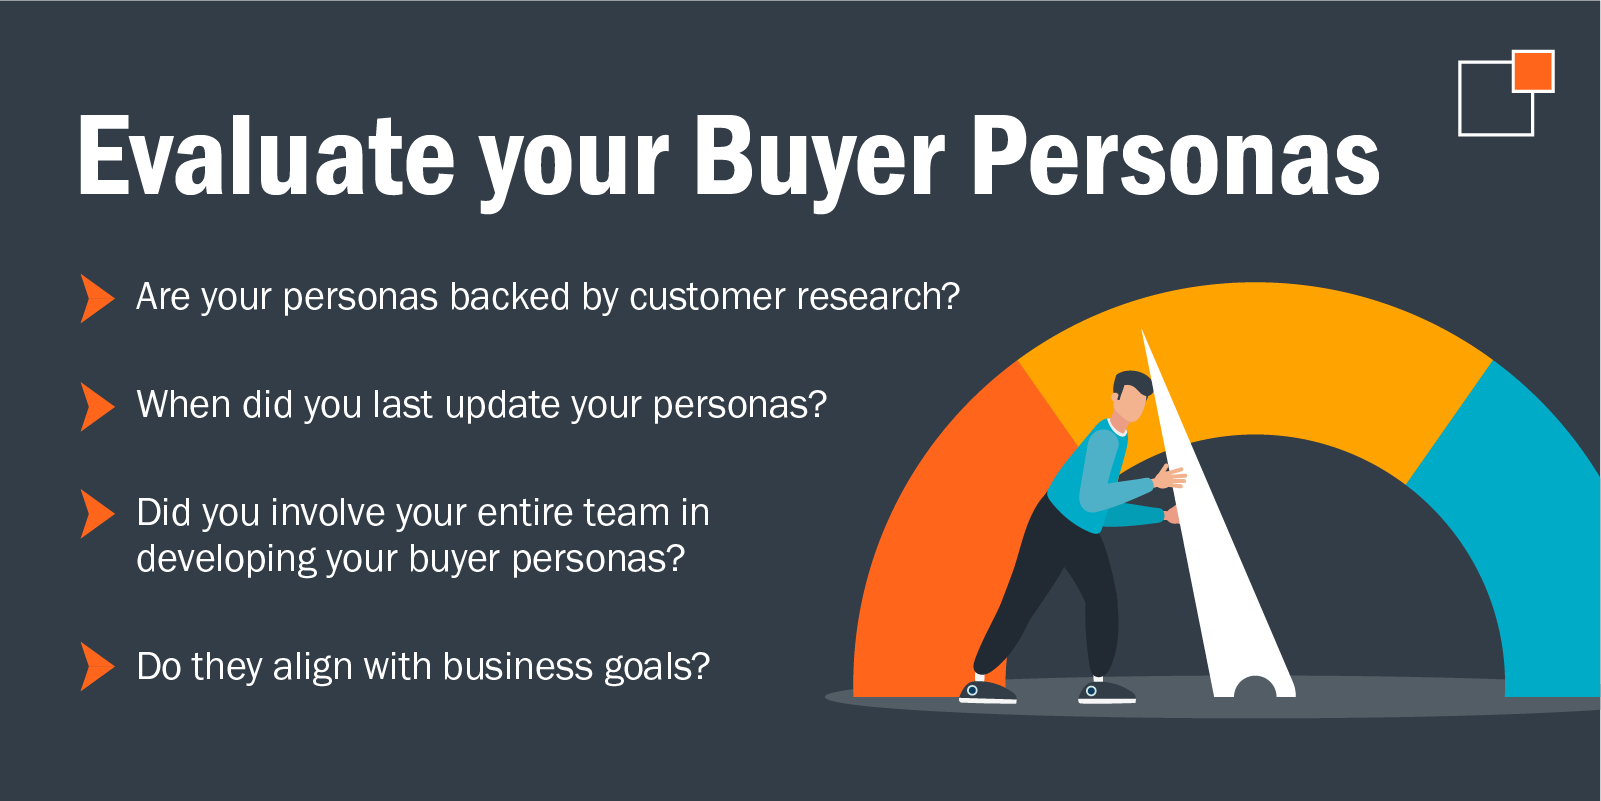 Evaluate your buyer personas Are your personas backed by customer research? When did you last update your personas? Did you involve your entire team in developing your buyer personas?  Do they align with business goals?